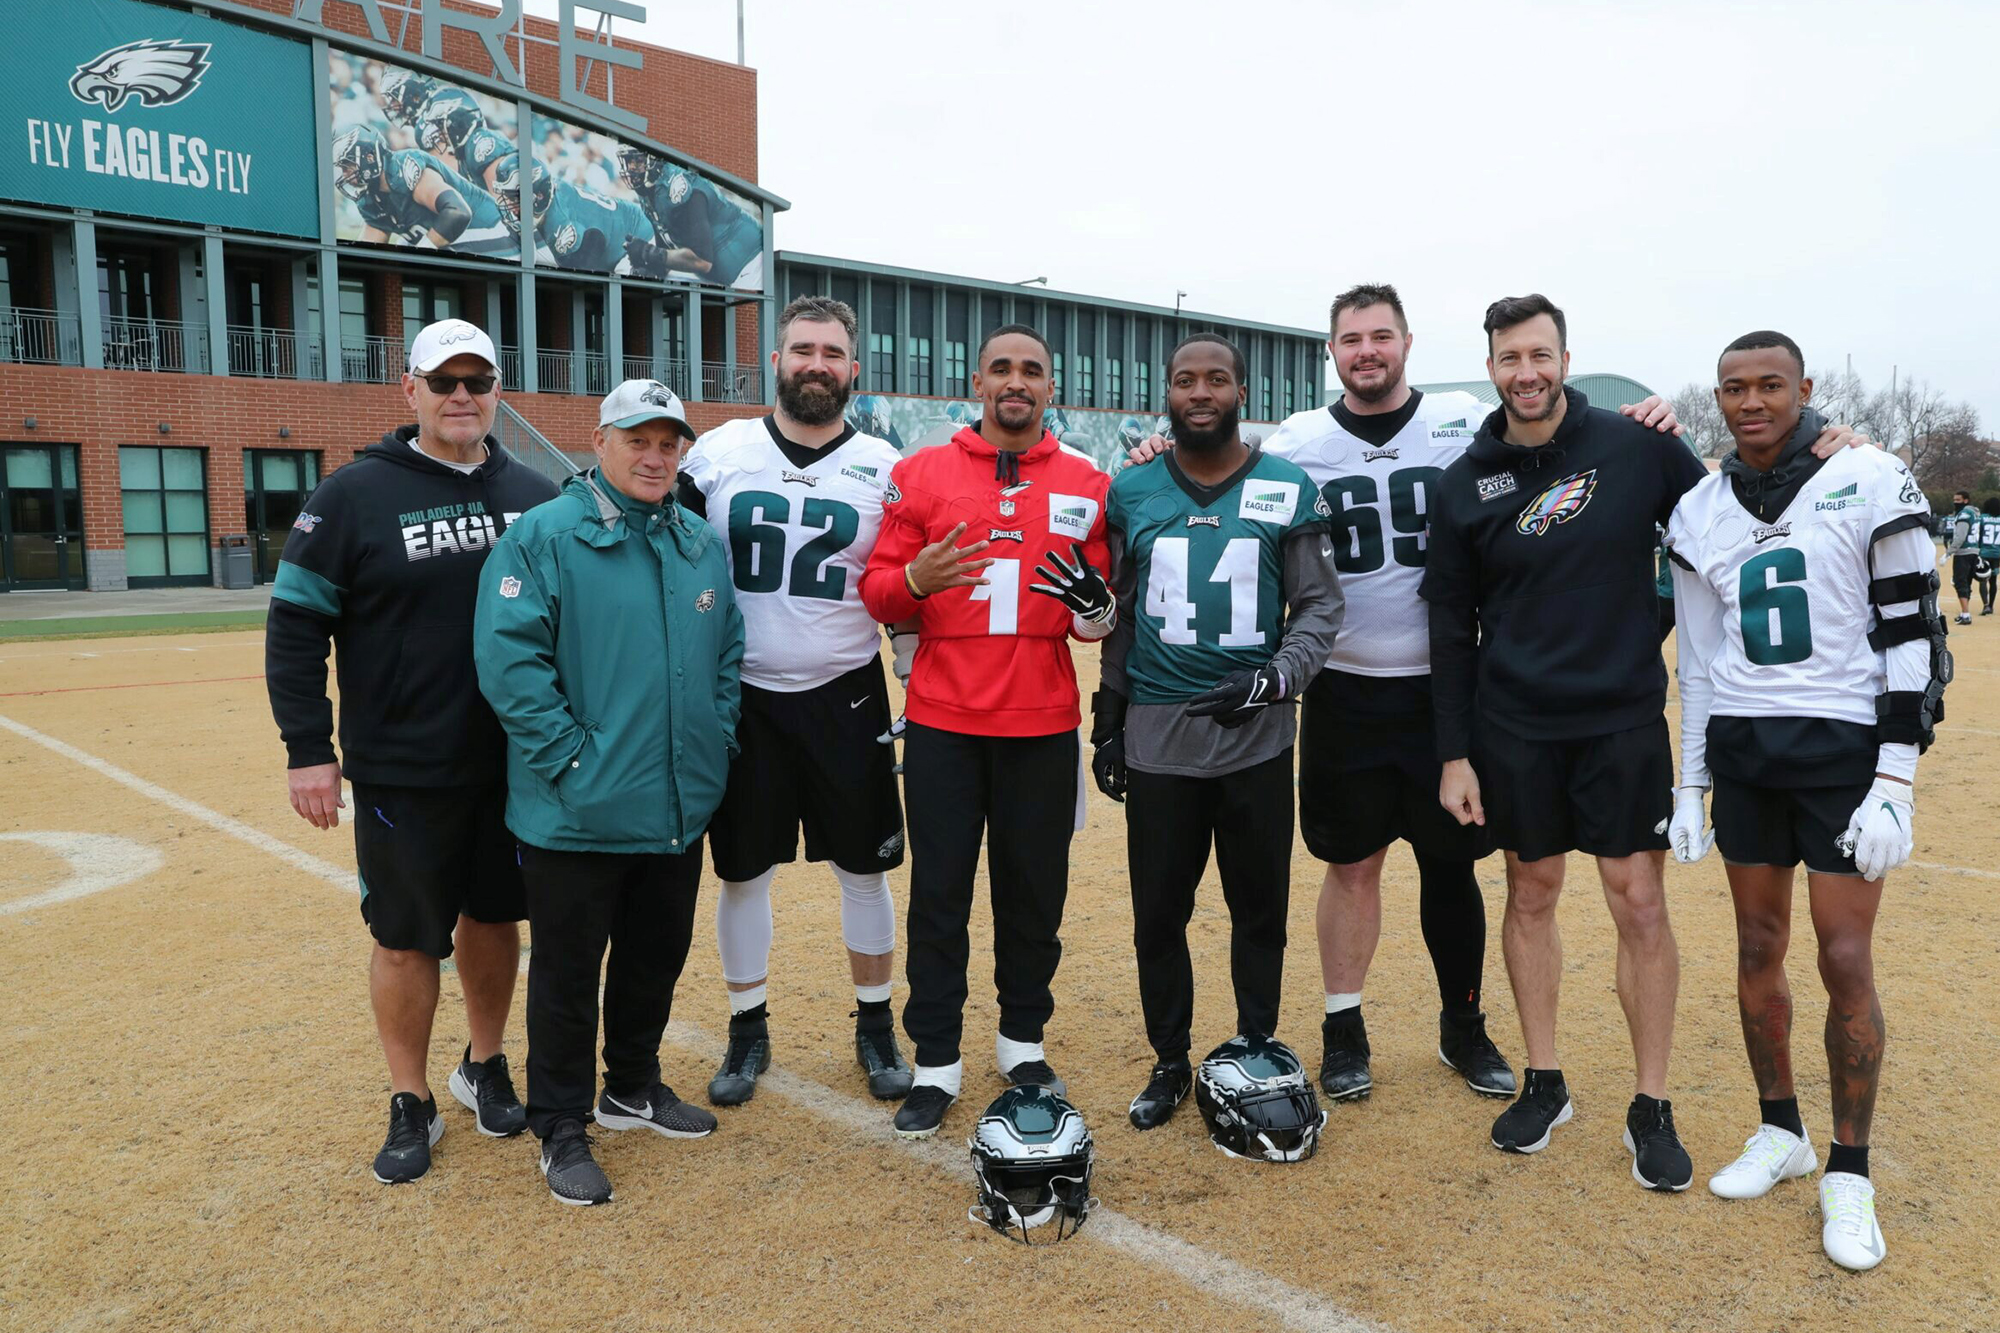 Connor Barwin (second from right) stands on the field with other members of the Eagles football team.